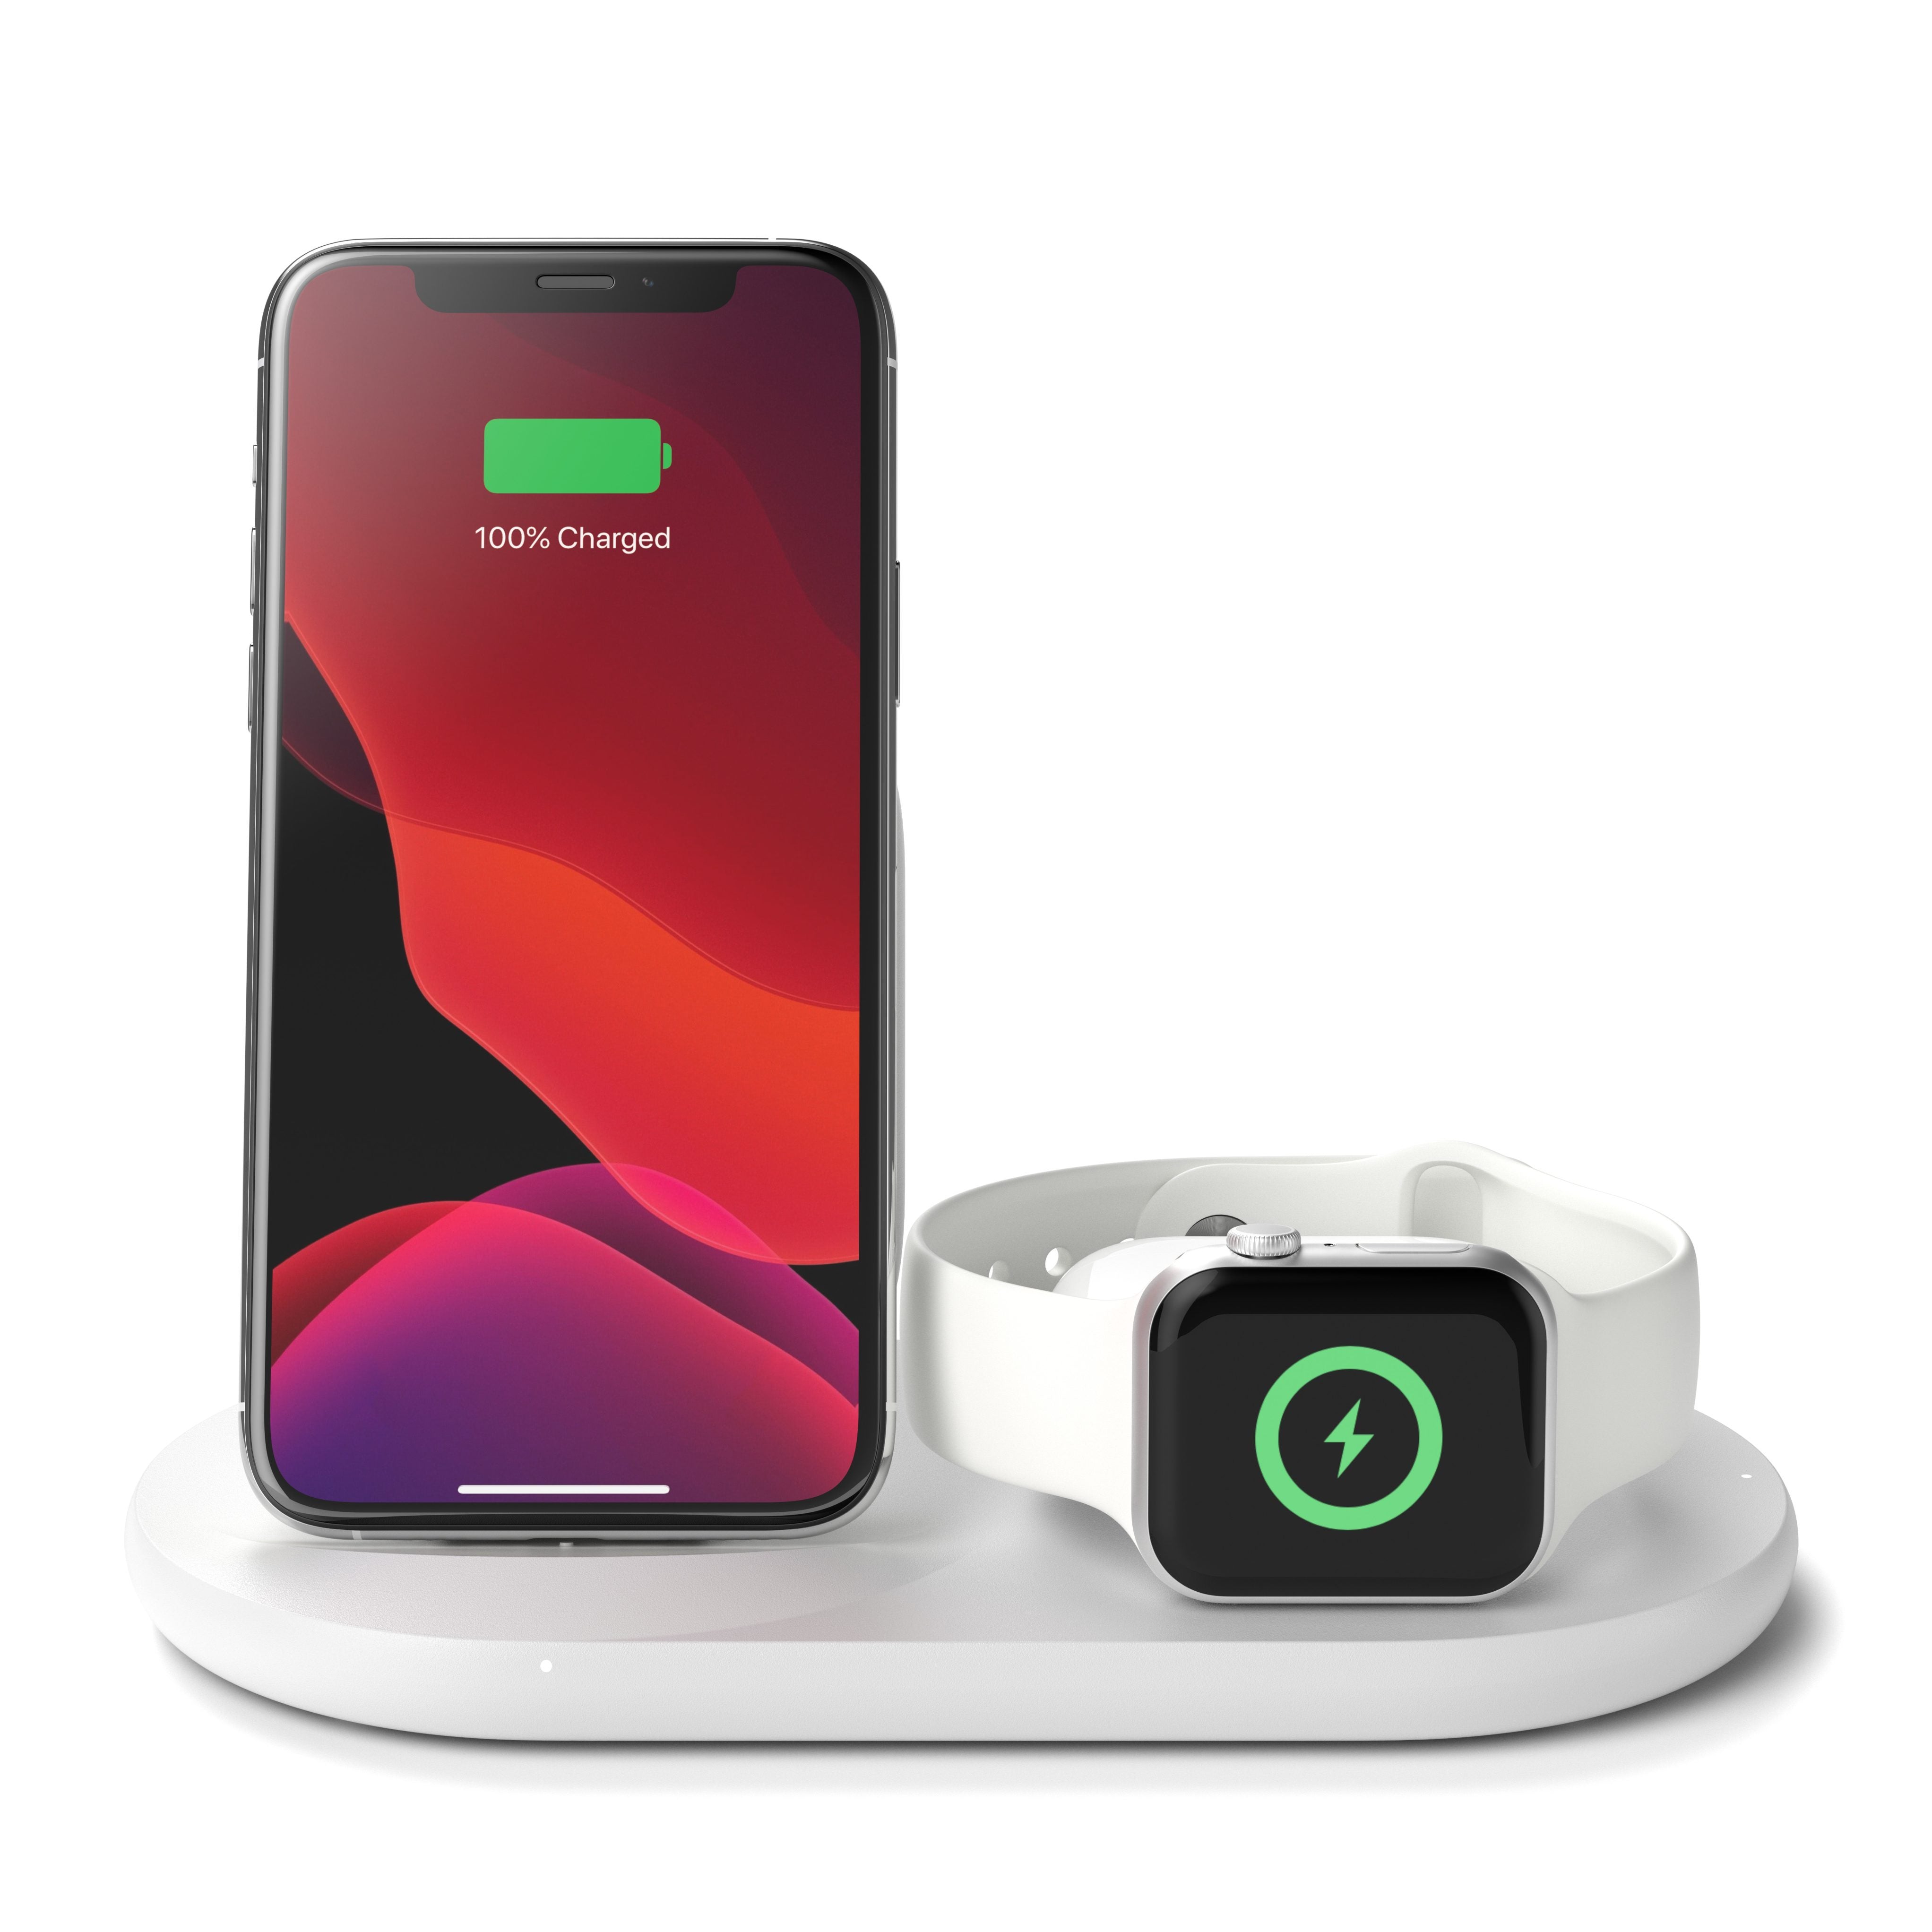 Belkin BOOST CHARGE 3-in-1 Wireless Charger - 10W Fast Qi Certified for iPhone 11/11Pro/ 11 Pro Max/Xs Max/XR/XS/X/8 Plus/8, Apple Watch Series 5/4/3/2/1 & Airpods Pro & QI enabled devices - White